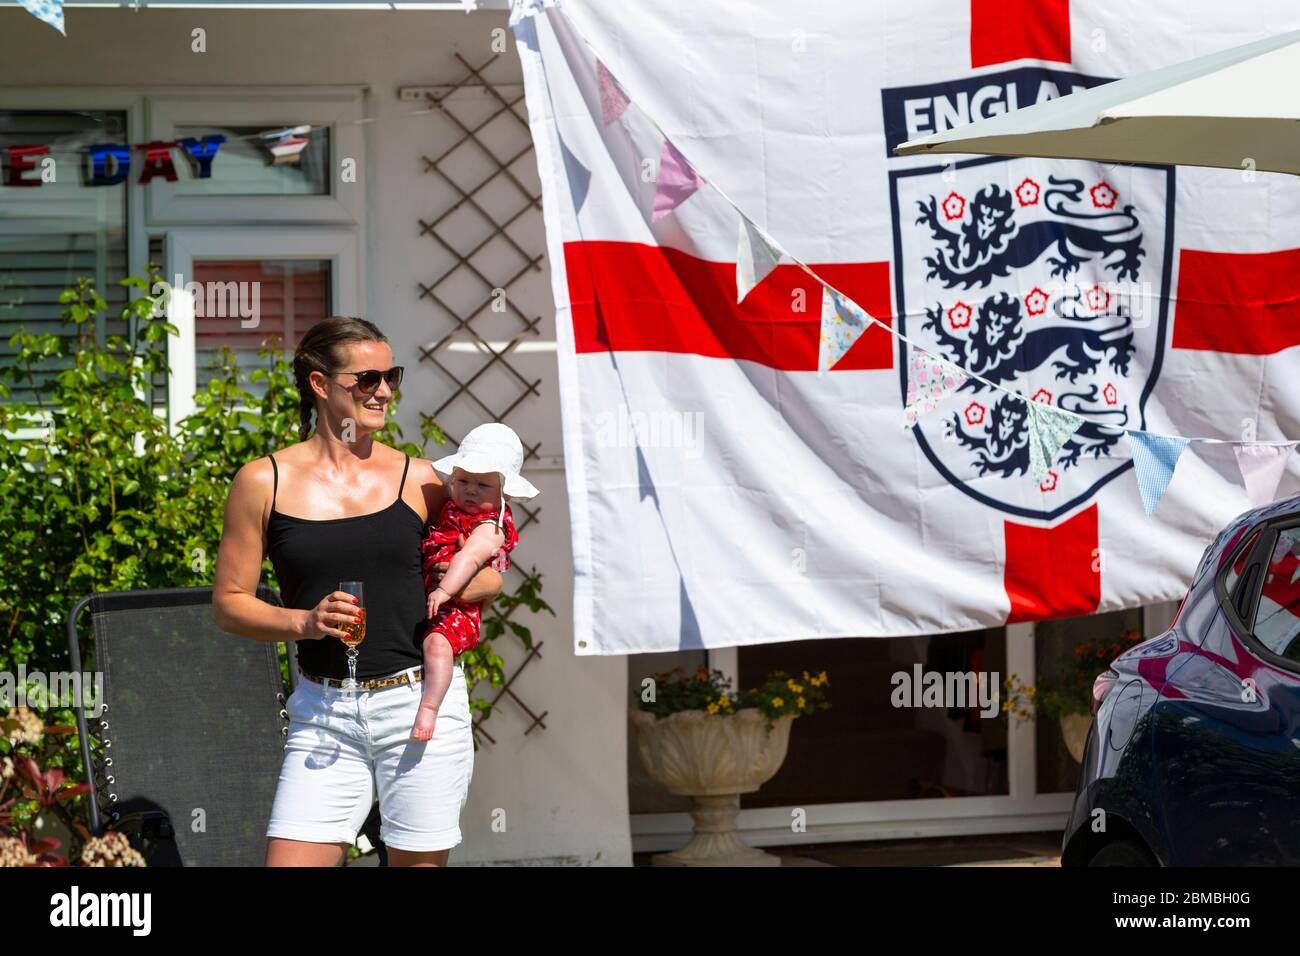 Ashford, Kent, UK. 8th May, 2020. Members of the community in the village of Hamstreet near Ashford in Kent come together to commemorate VE day on it's 75th anniversary with a tea party outside their front garden. A woman drinking champagne holding a baby beside a a large England flag. ©Paul Lawrenson 2020, Photo Credit: Paul Lawrenson/Alamy Live News Stock Photo